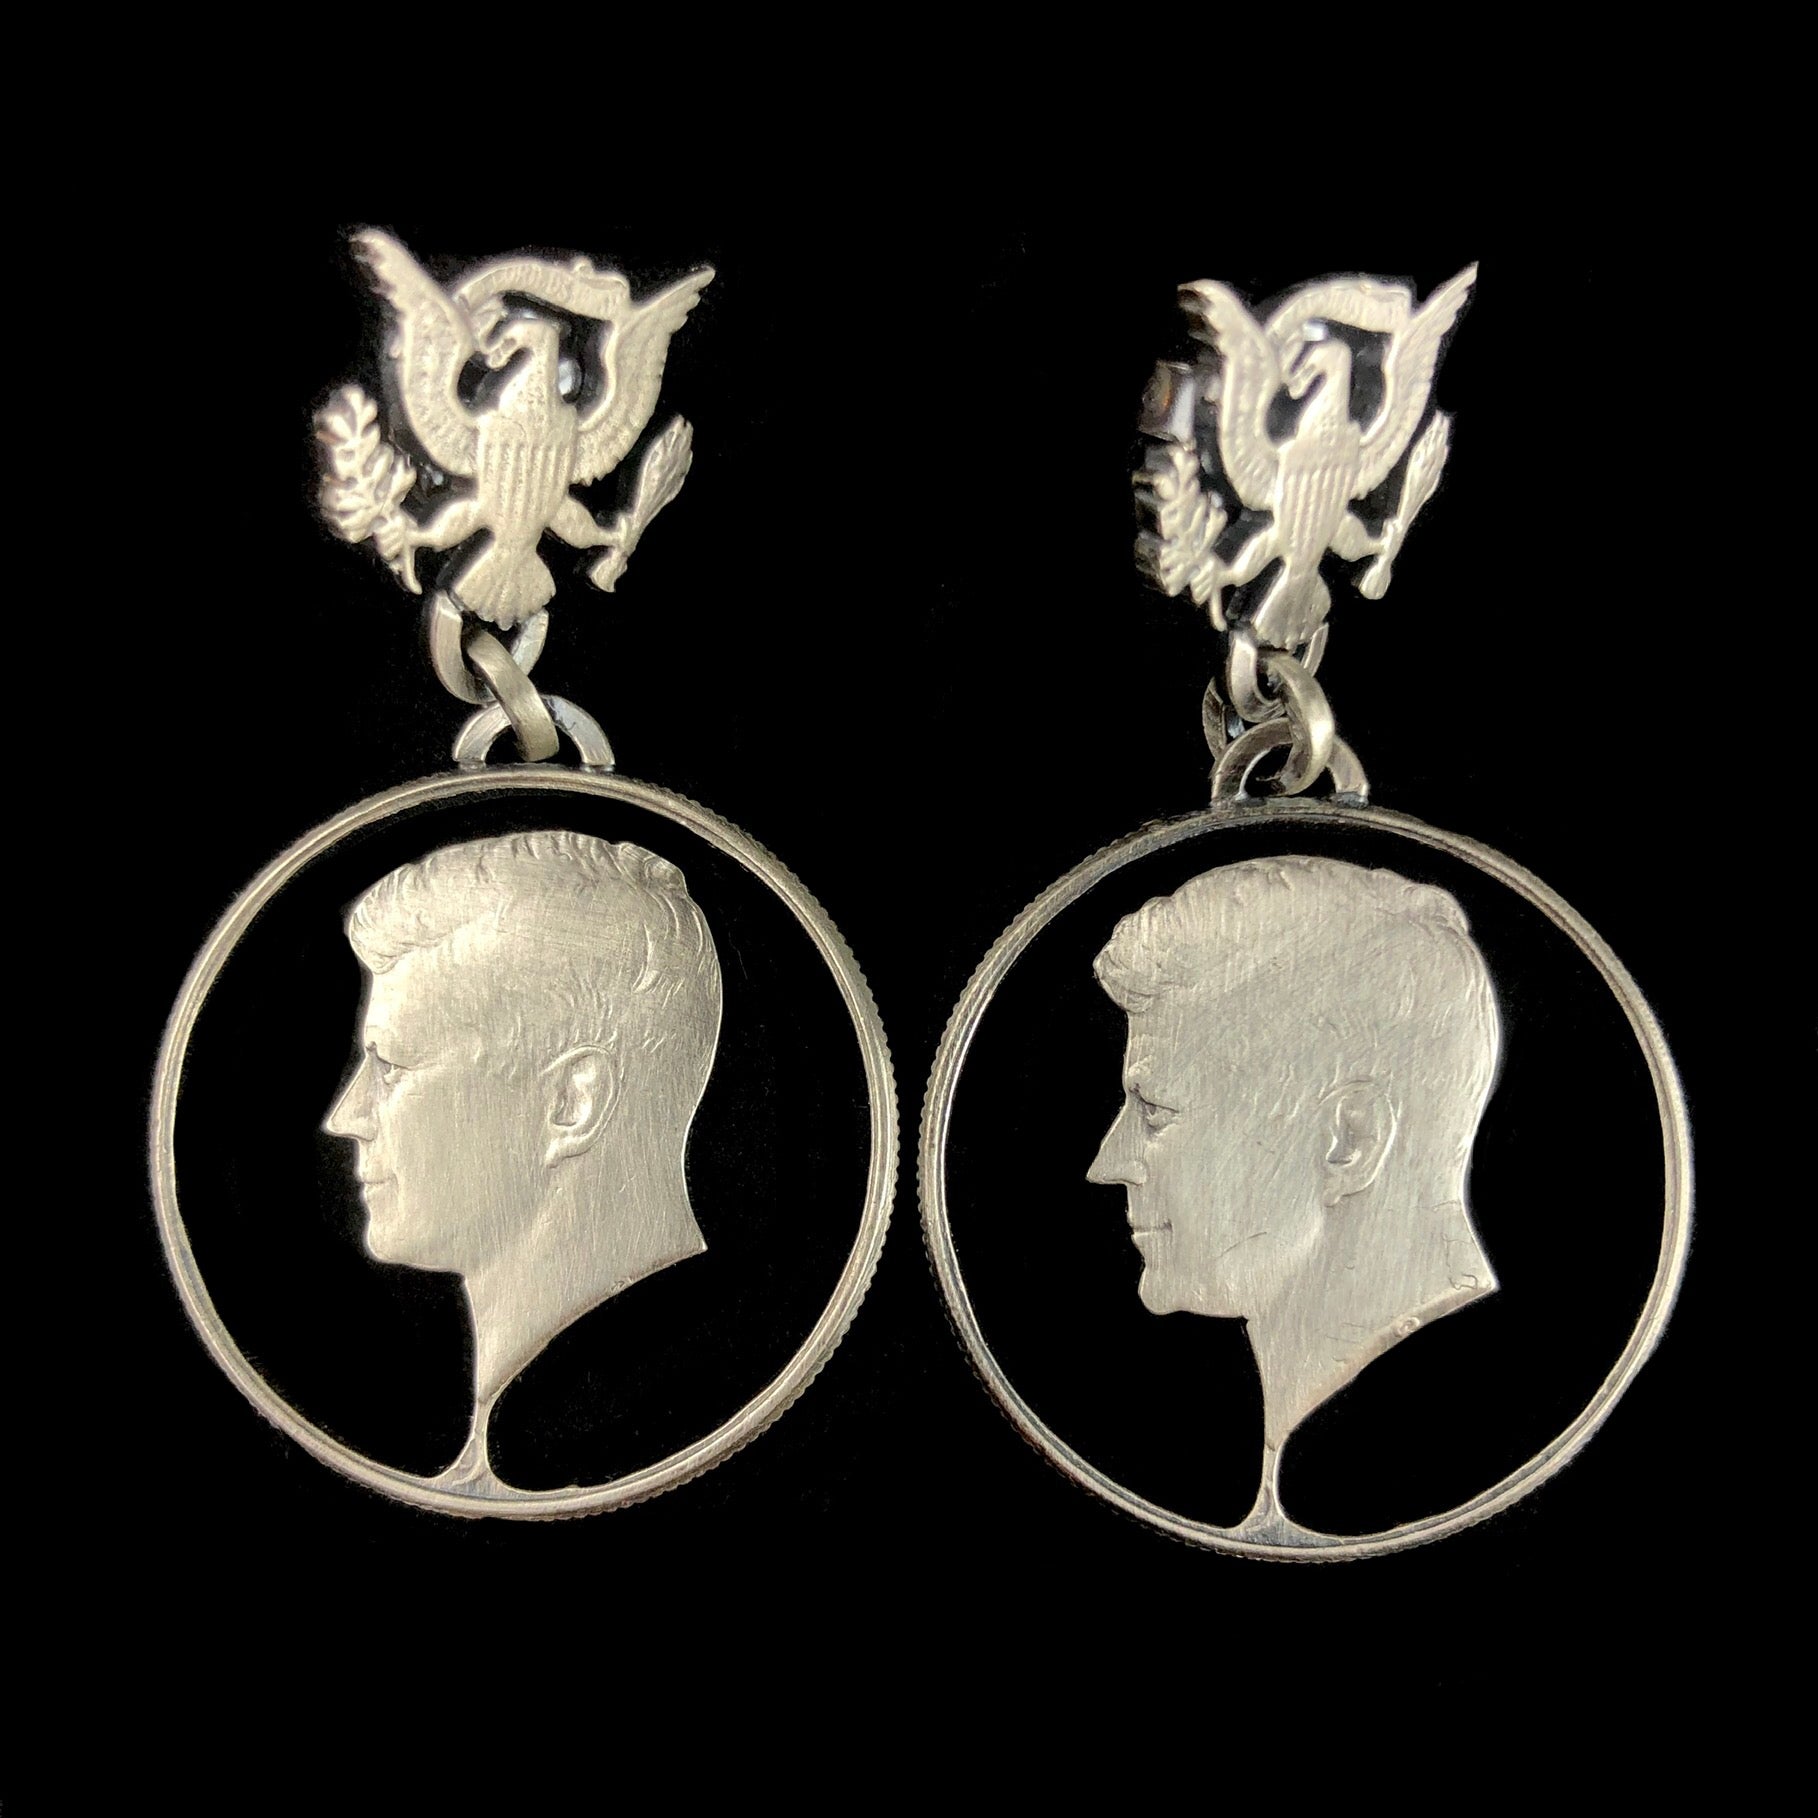 Front view of JFK coin Earrings